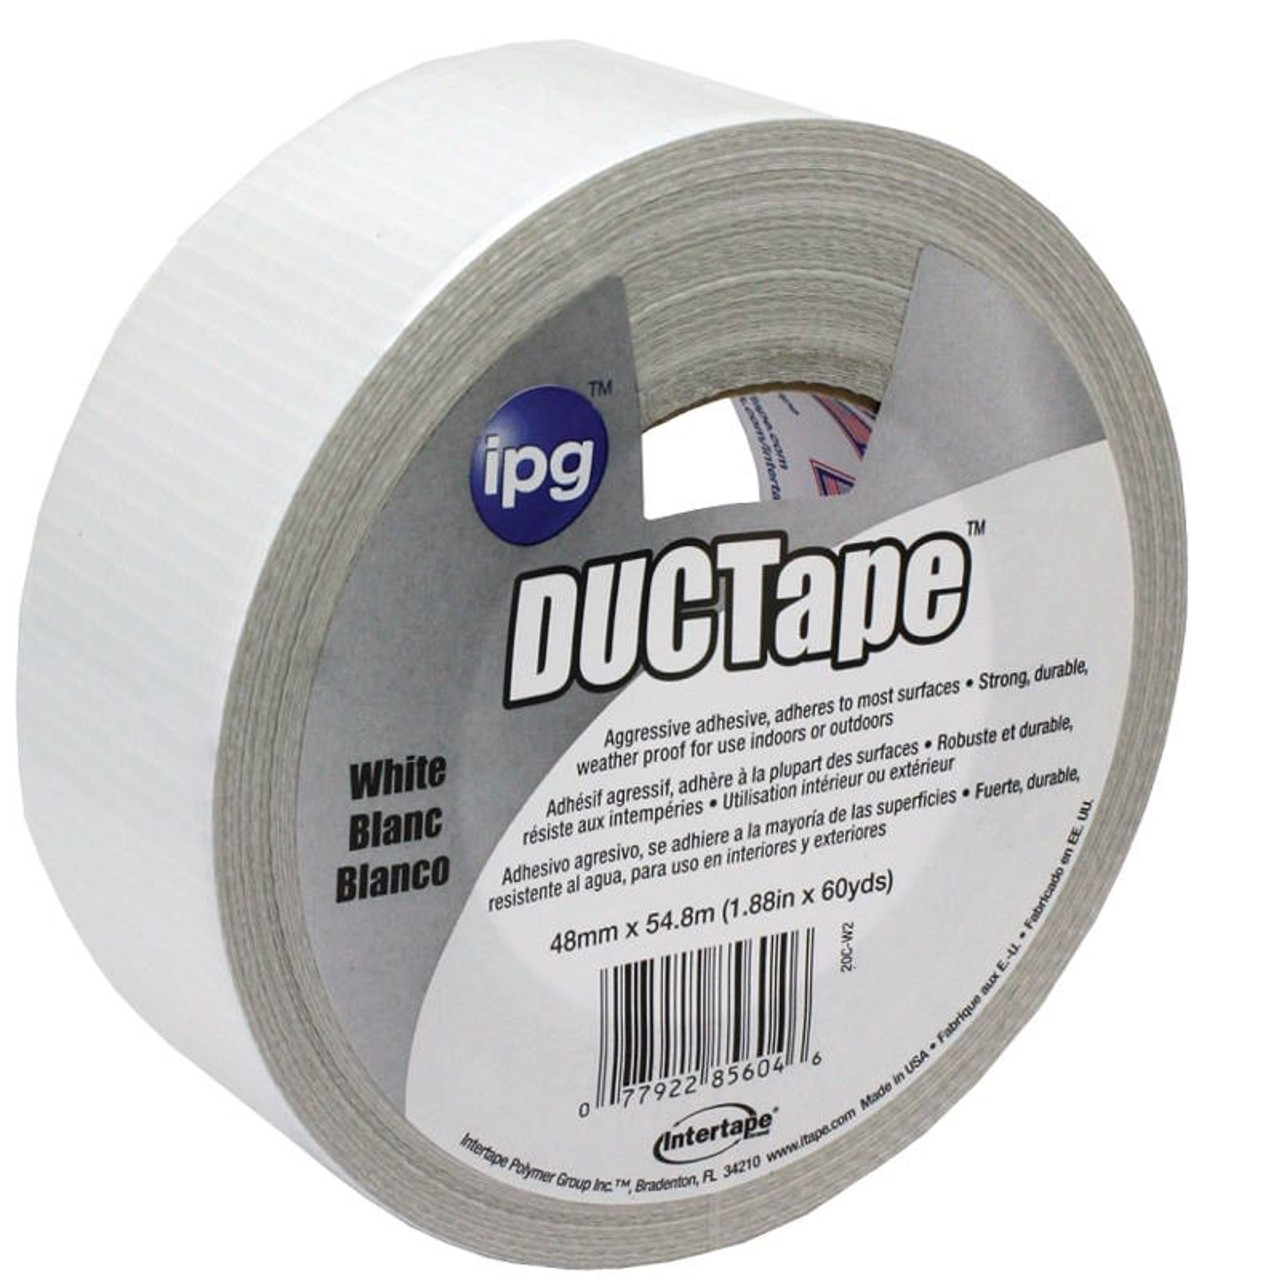 2 x 60 Yards White Duct Tape